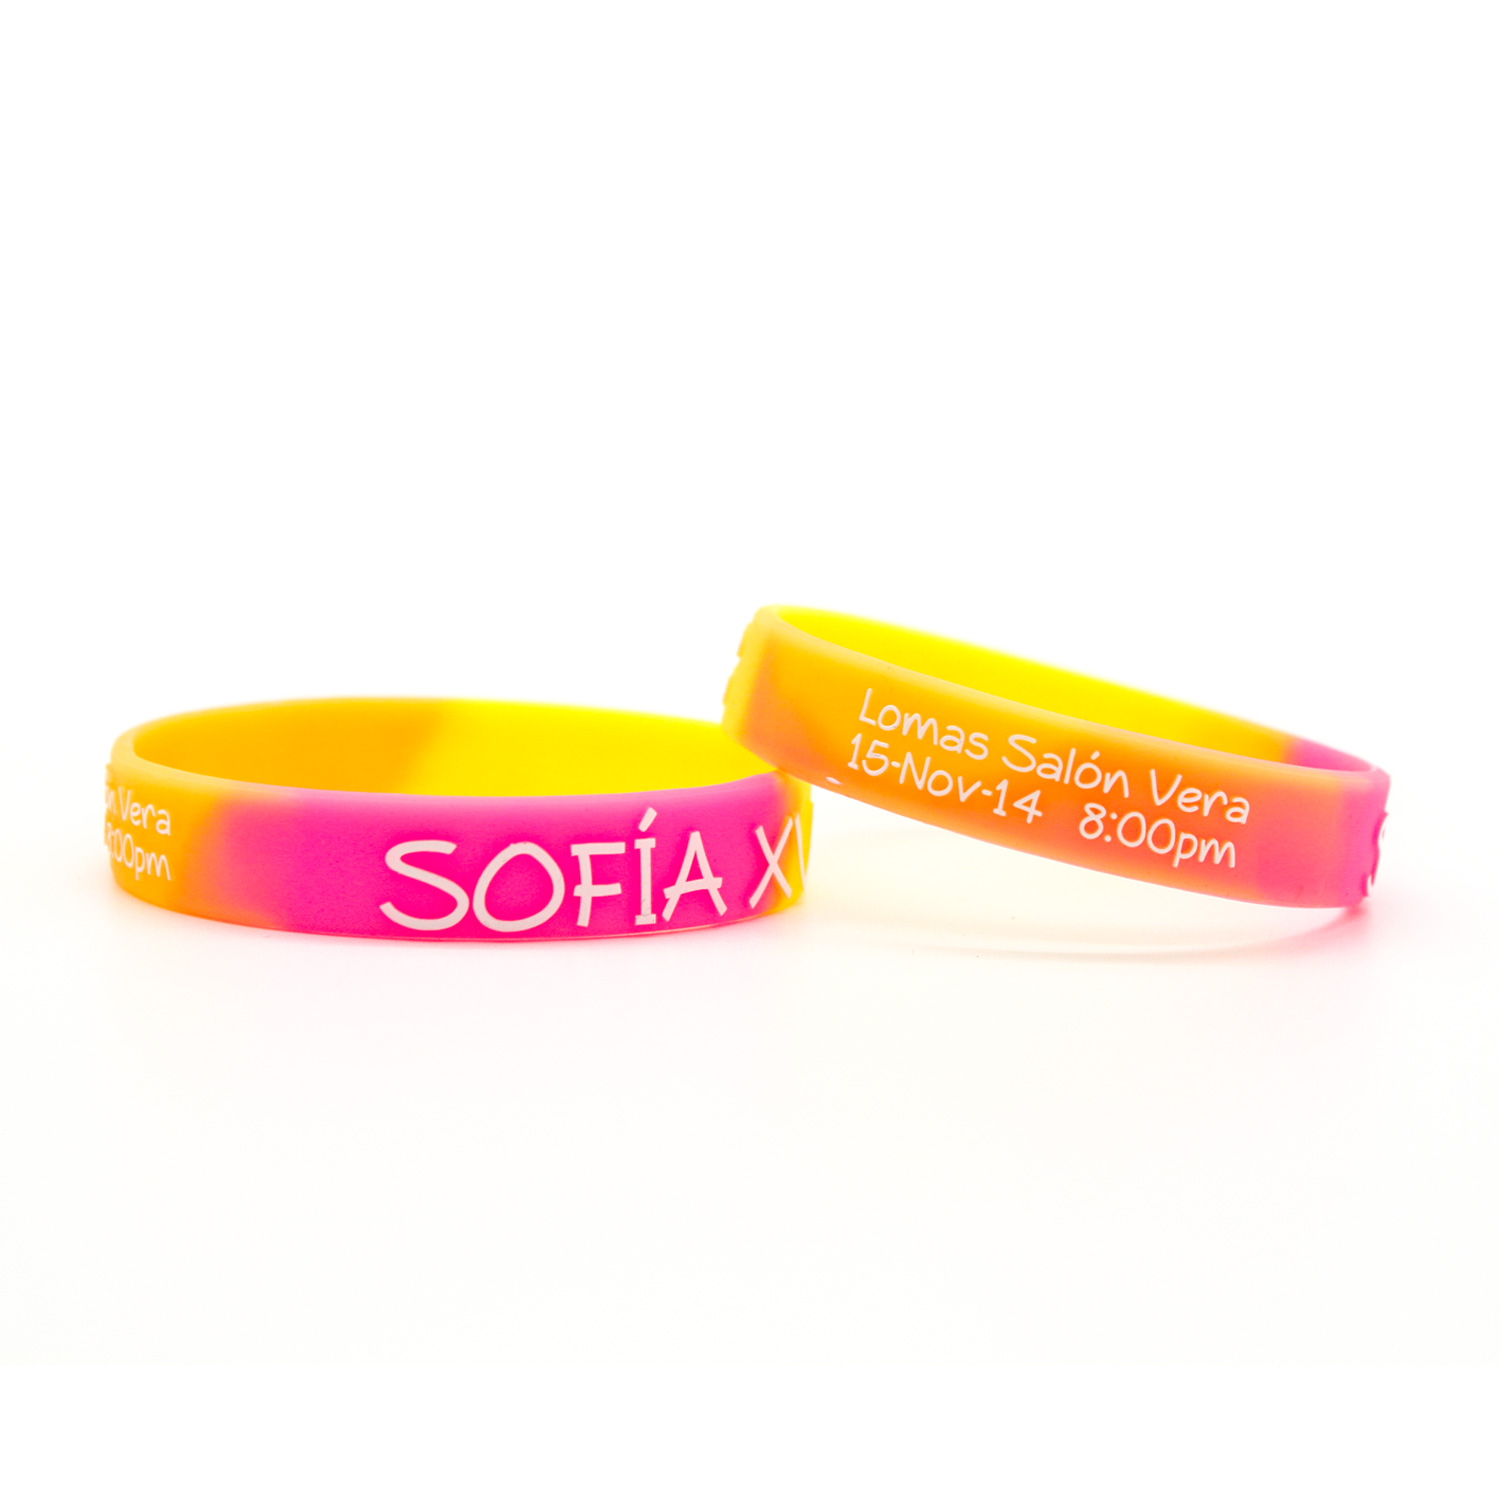 Promotional Multi Colour Wristband - Debossed/Sunken In with Colour Fill In